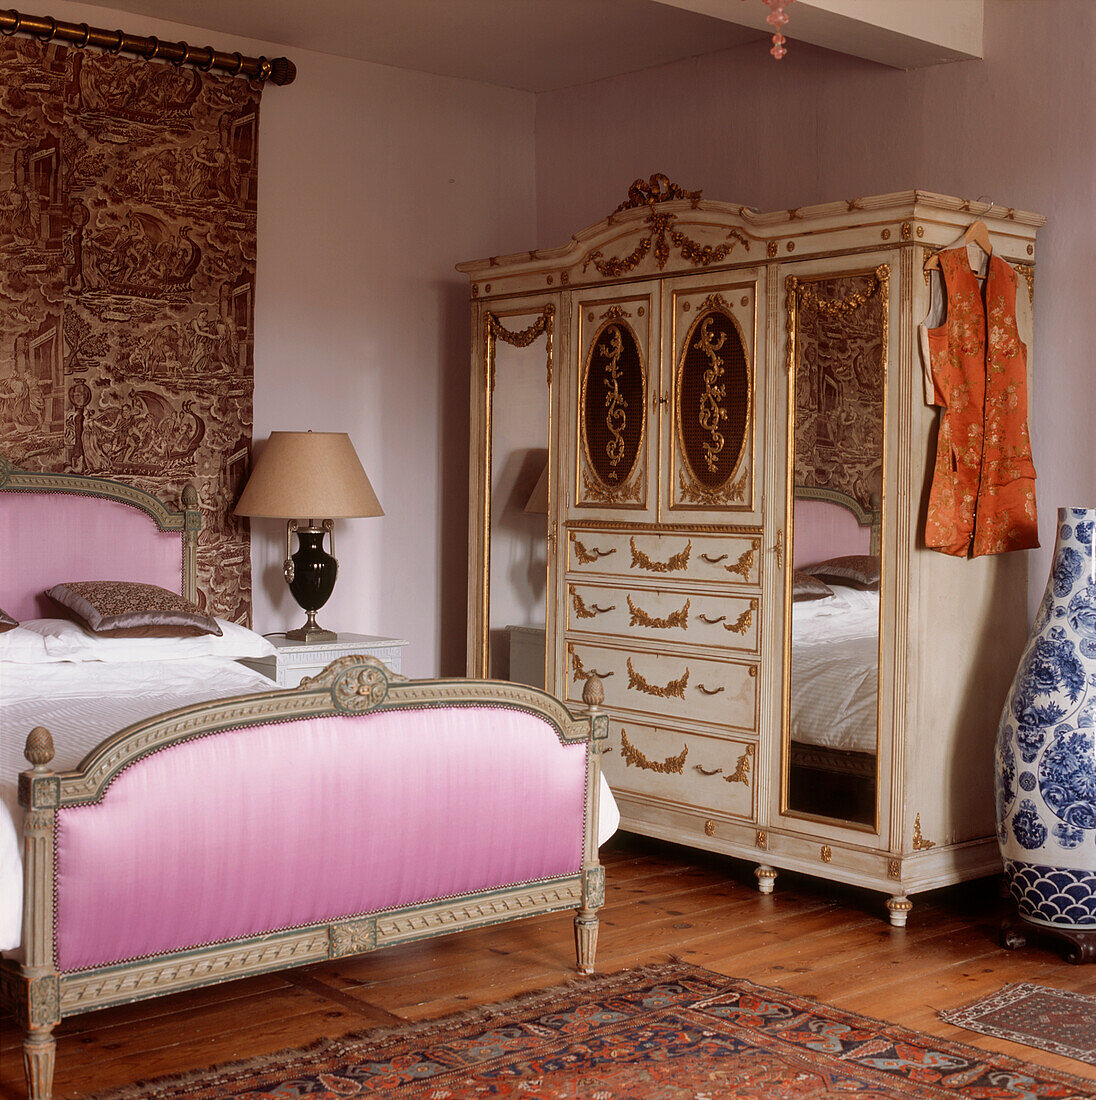 Ornate French period style bedroom with pink velvet fabric covered bedstead and decorative gold leaf wardrobe